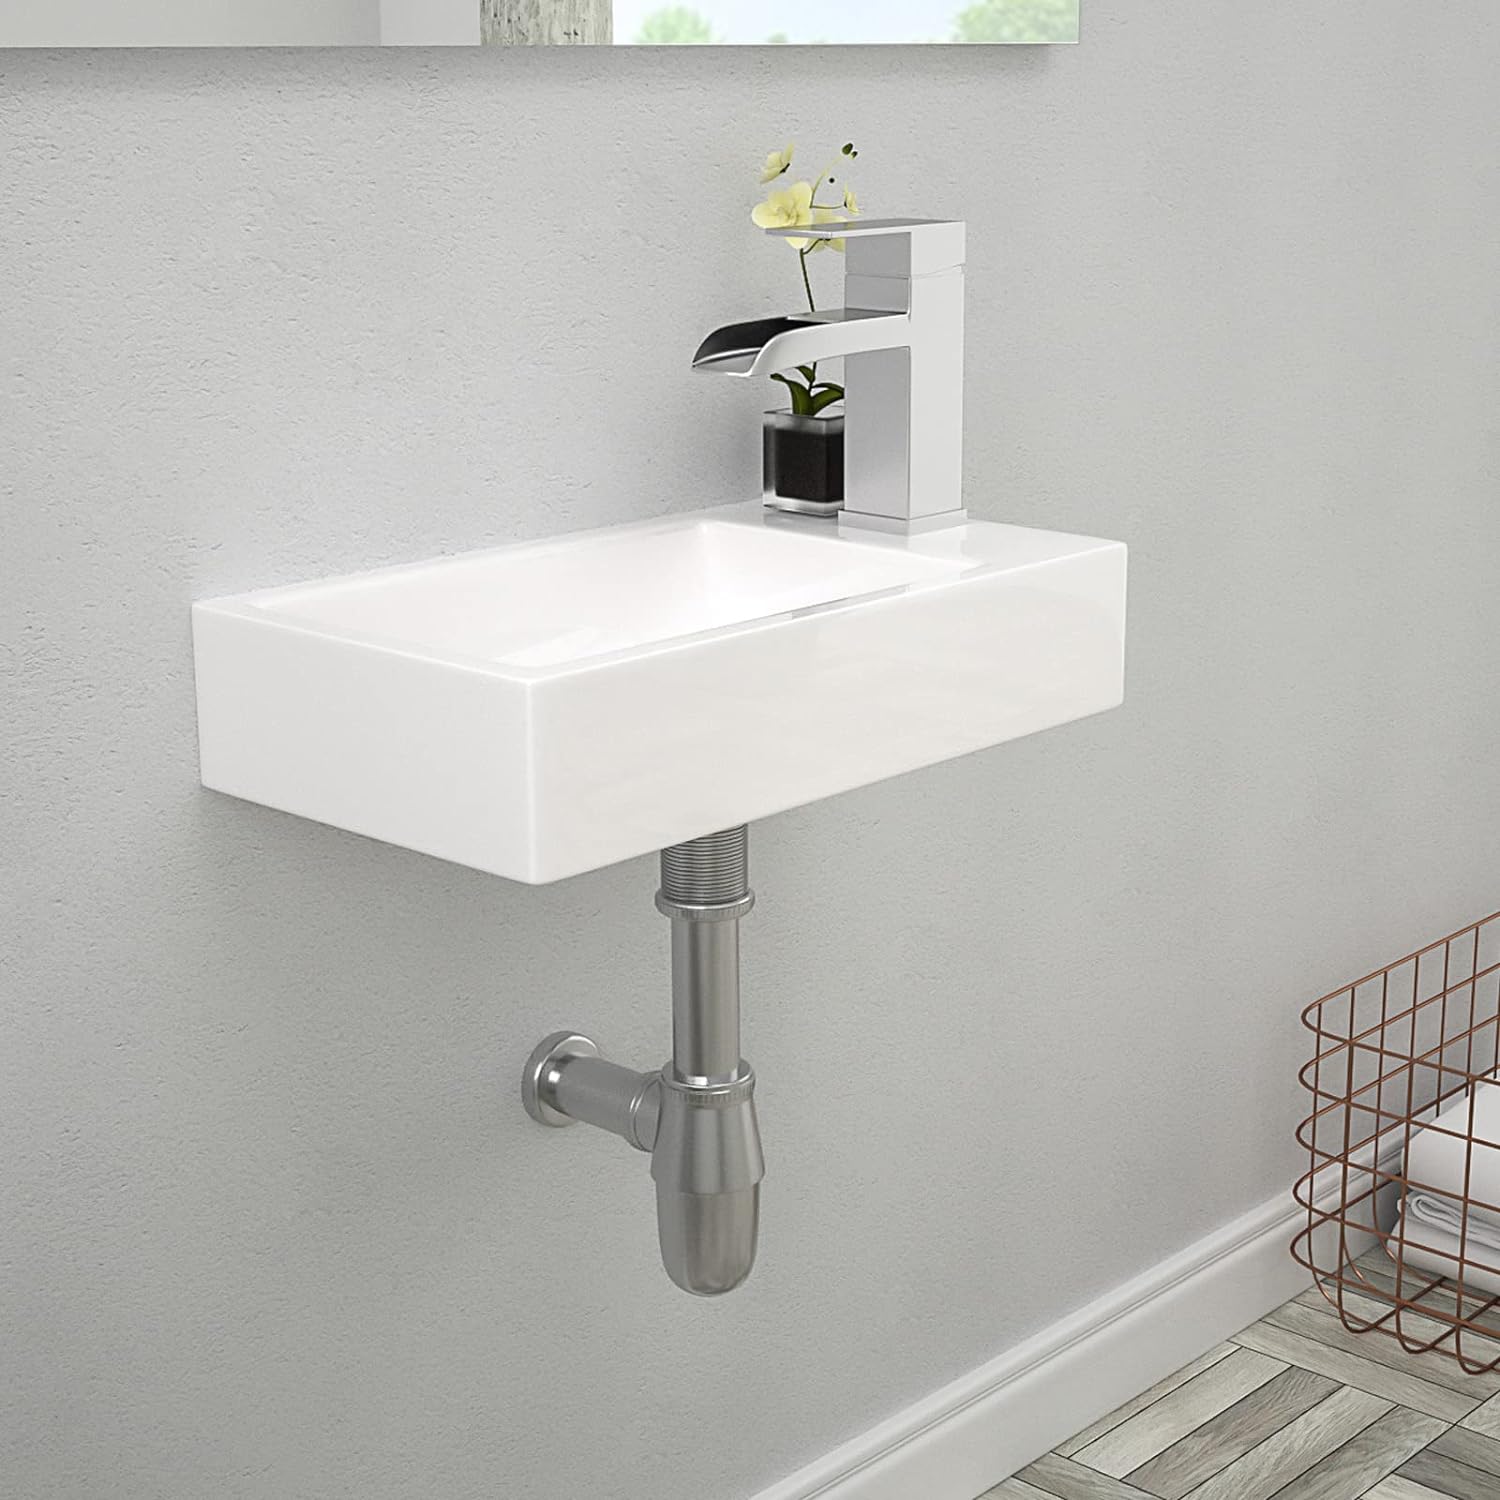 Lordear 18x10 Inch Rectangle Wall Mount Bathroom Sink with Single Faucet Hole White Porcelain Ceramic | Bathroom, Bathroom Basin, Bathroom Ceramic Sinks, Bathroom Sinks | Lordear